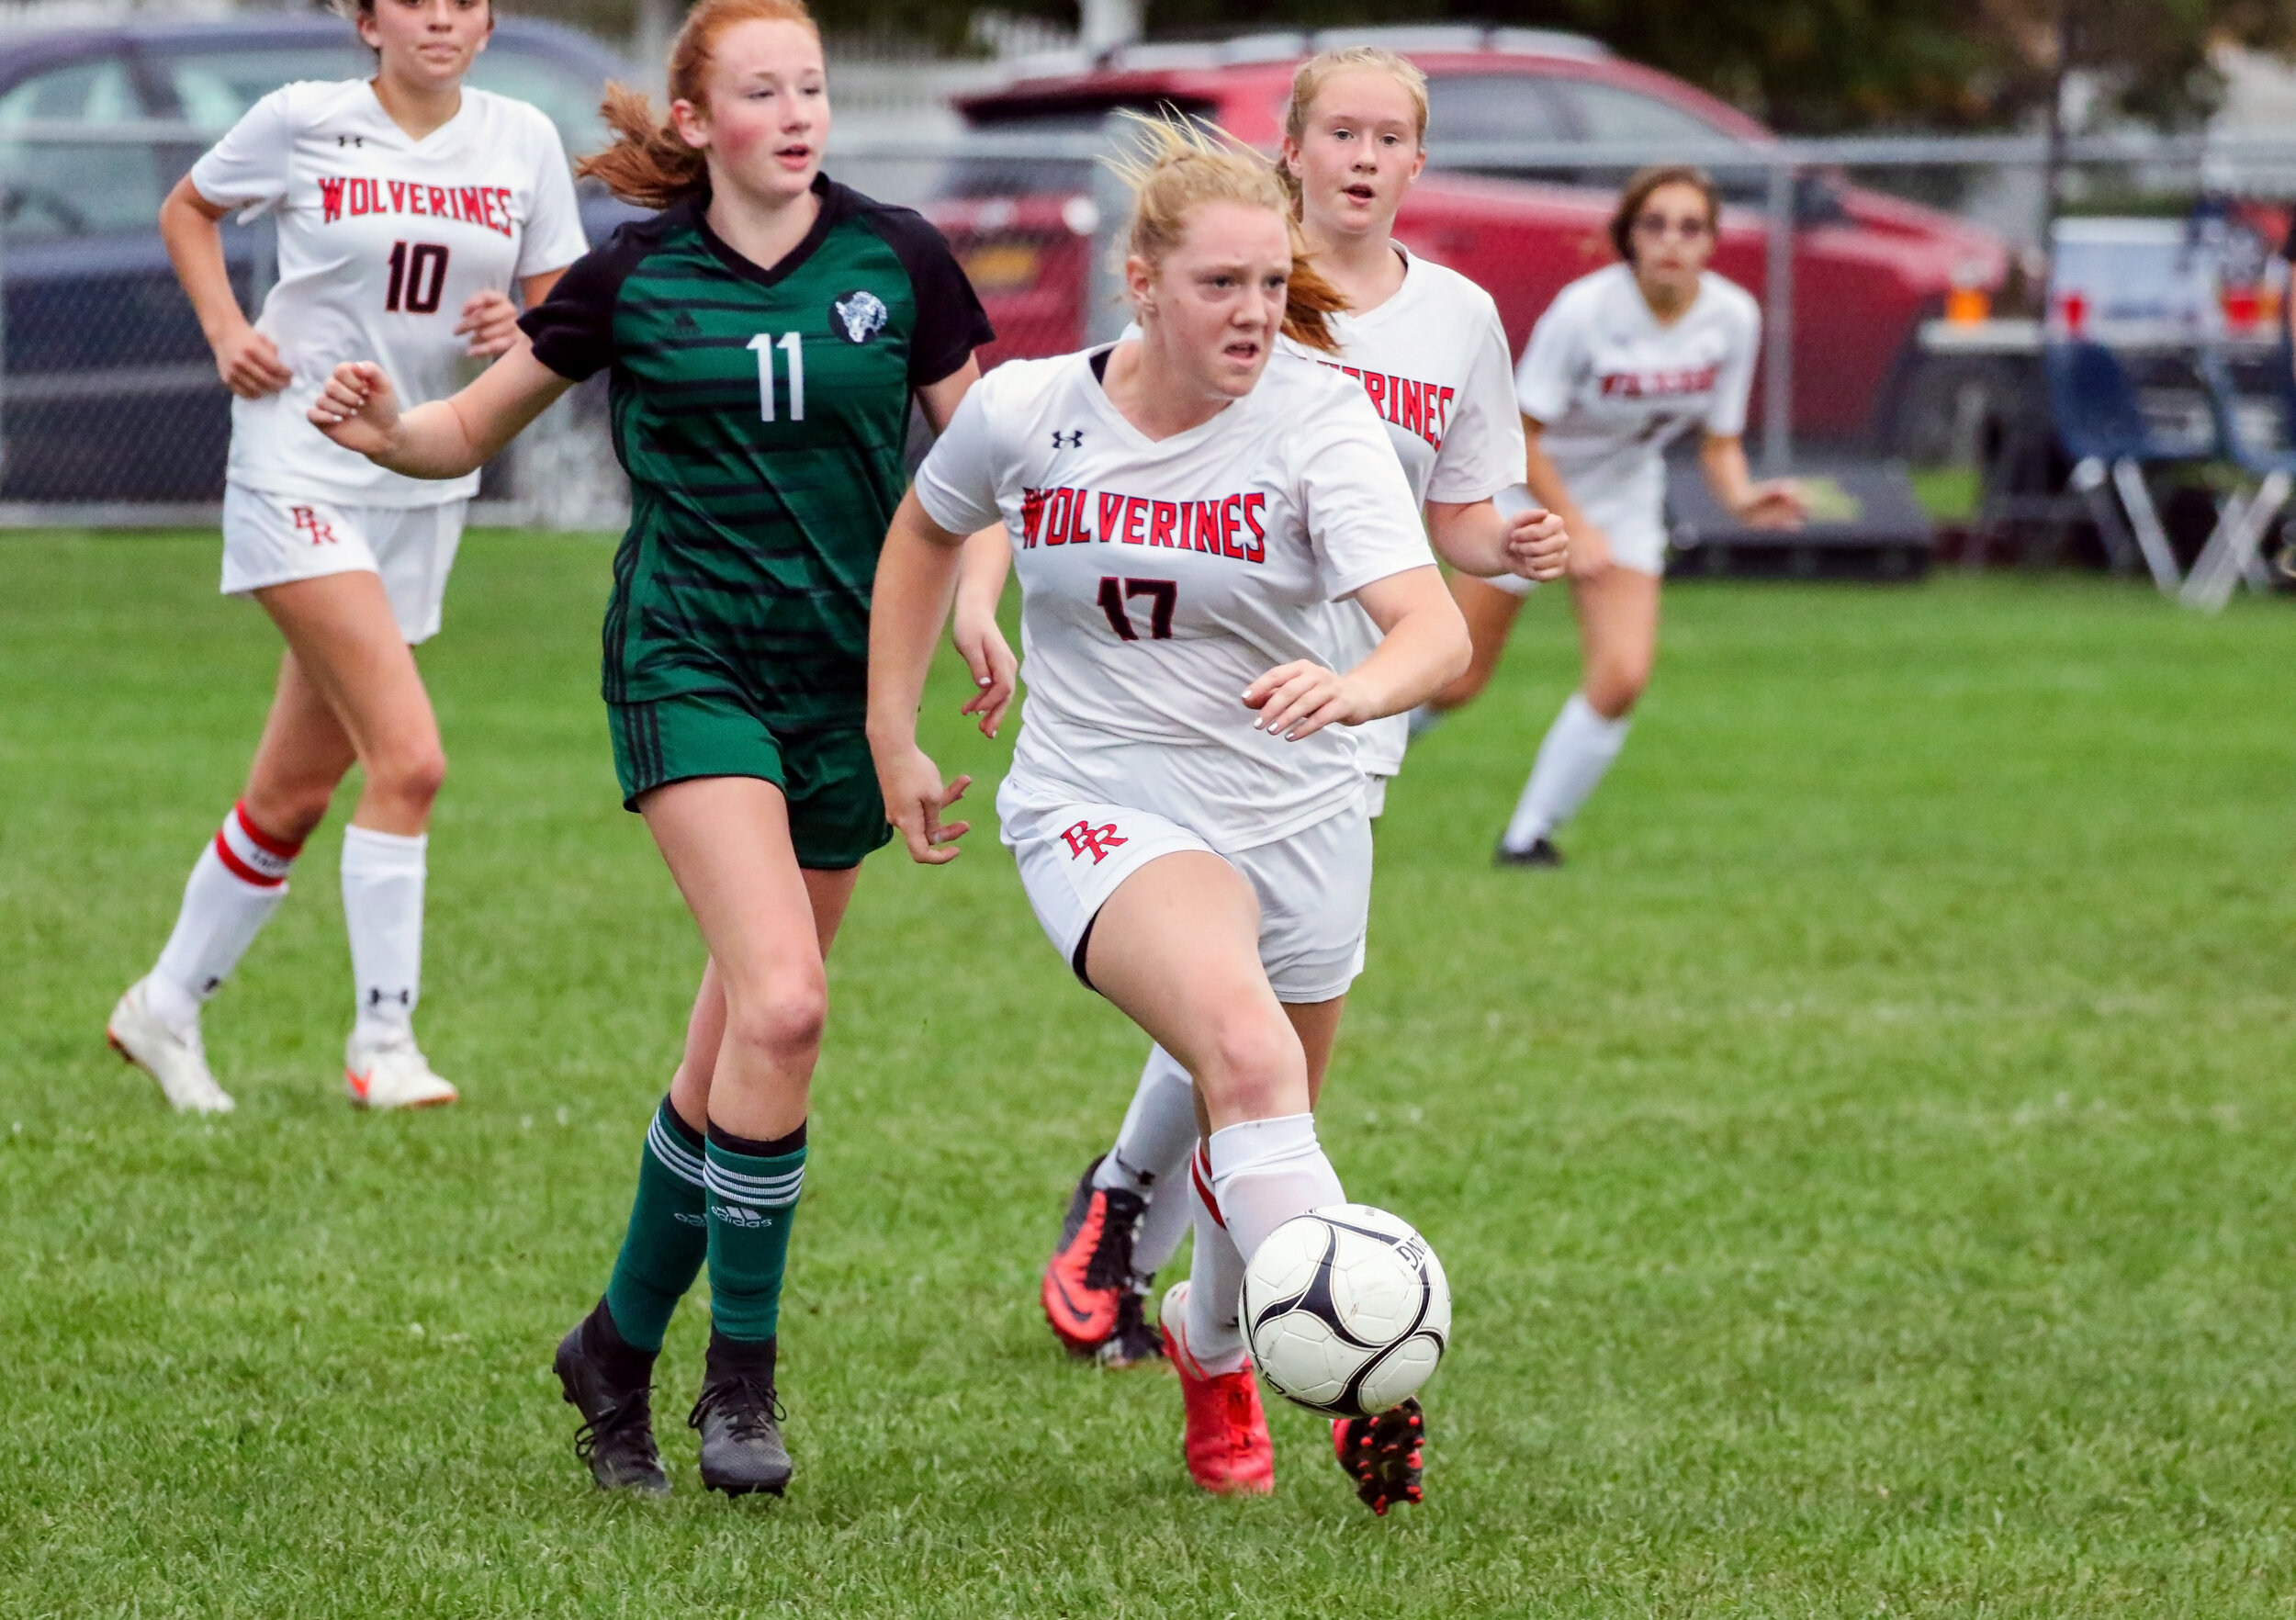  Bolivar-Richburg senior Jessica Majot (17) sends the  ball downfield, as Genesee Valley/Belfast sophomore Abby Sullivan (11) races over to defend during Saturday evening’s road contest in Belfast. [Chris Brooks/WellsvilleSports.com] 